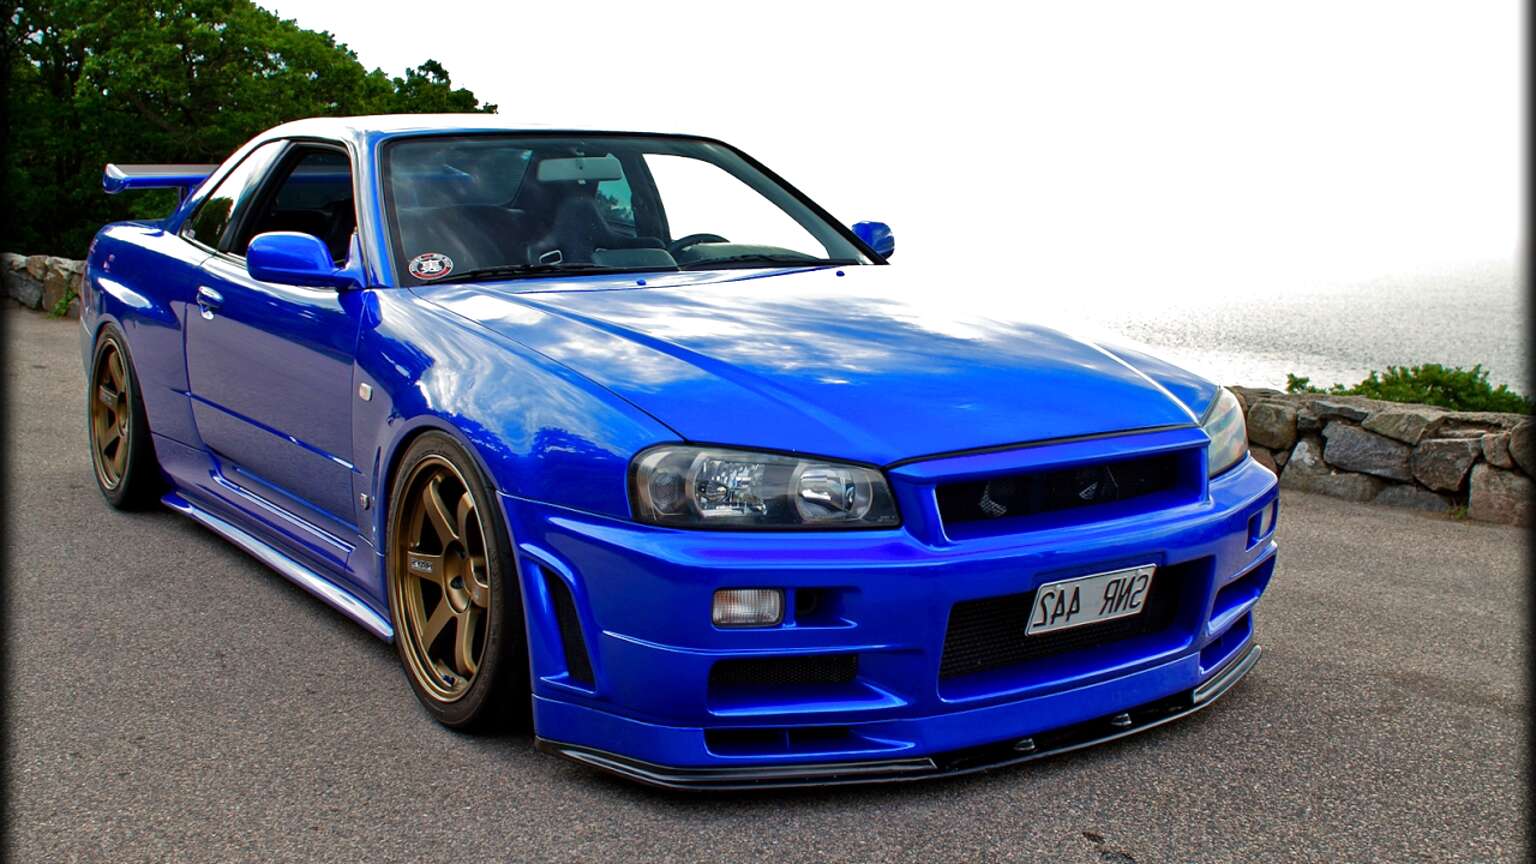 Nissan R34 for sale in UK